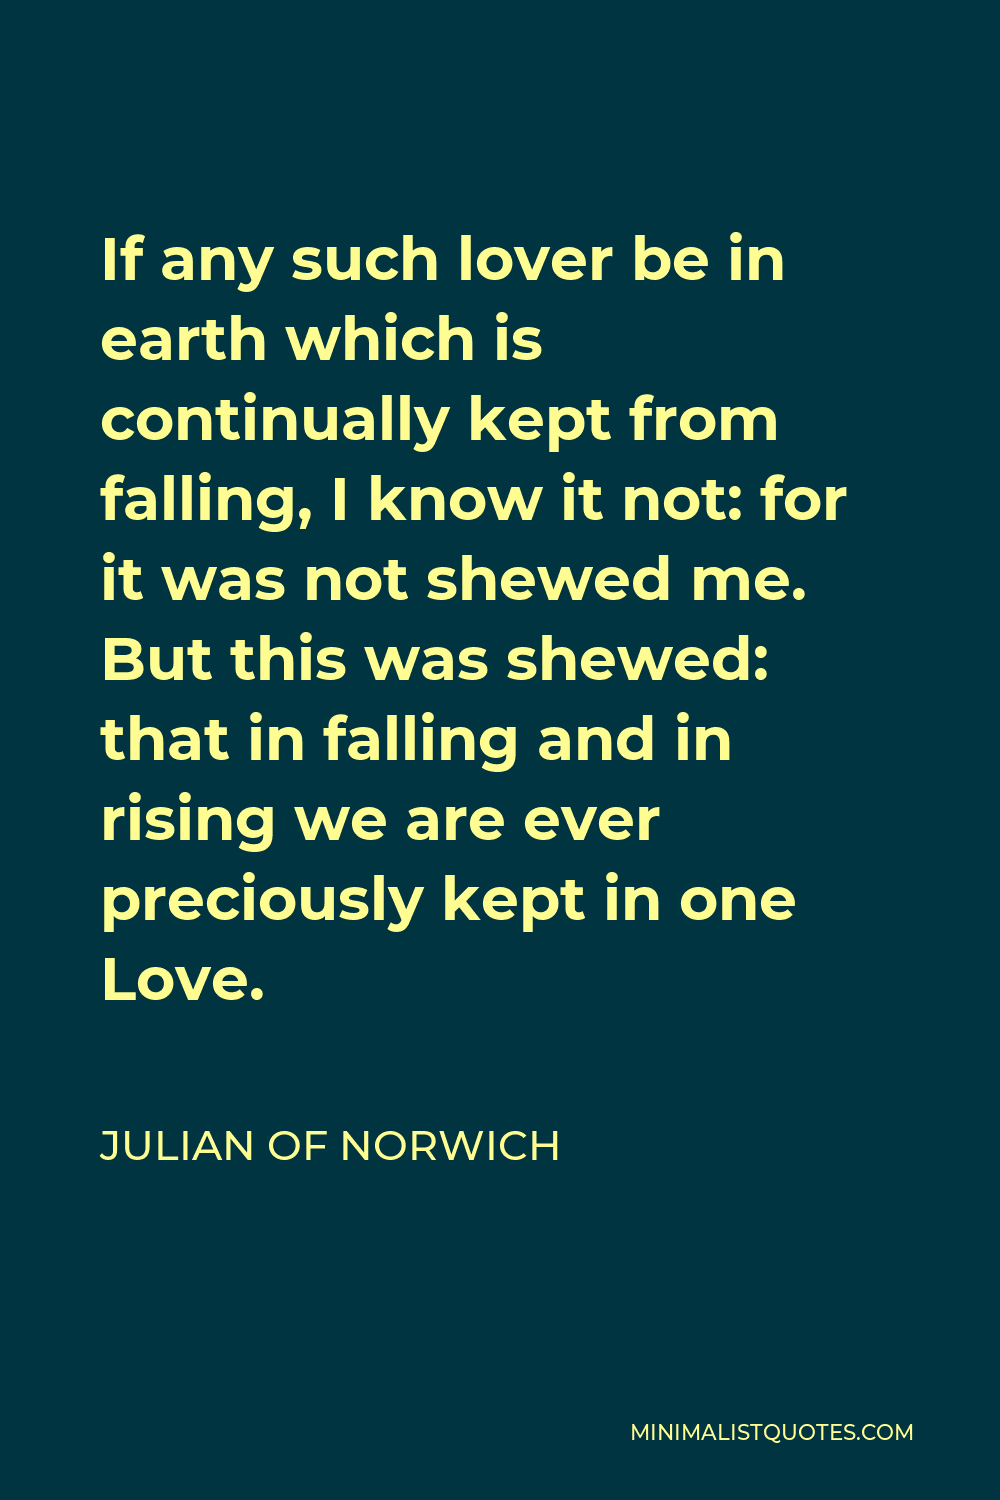 Julian of Norwich Quote - If any such lover be in earth which is continually kept from falling, I know it not: for it was not shewed me. But this was shewed: that in falling and in rising we are ever preciously kept in one Love.